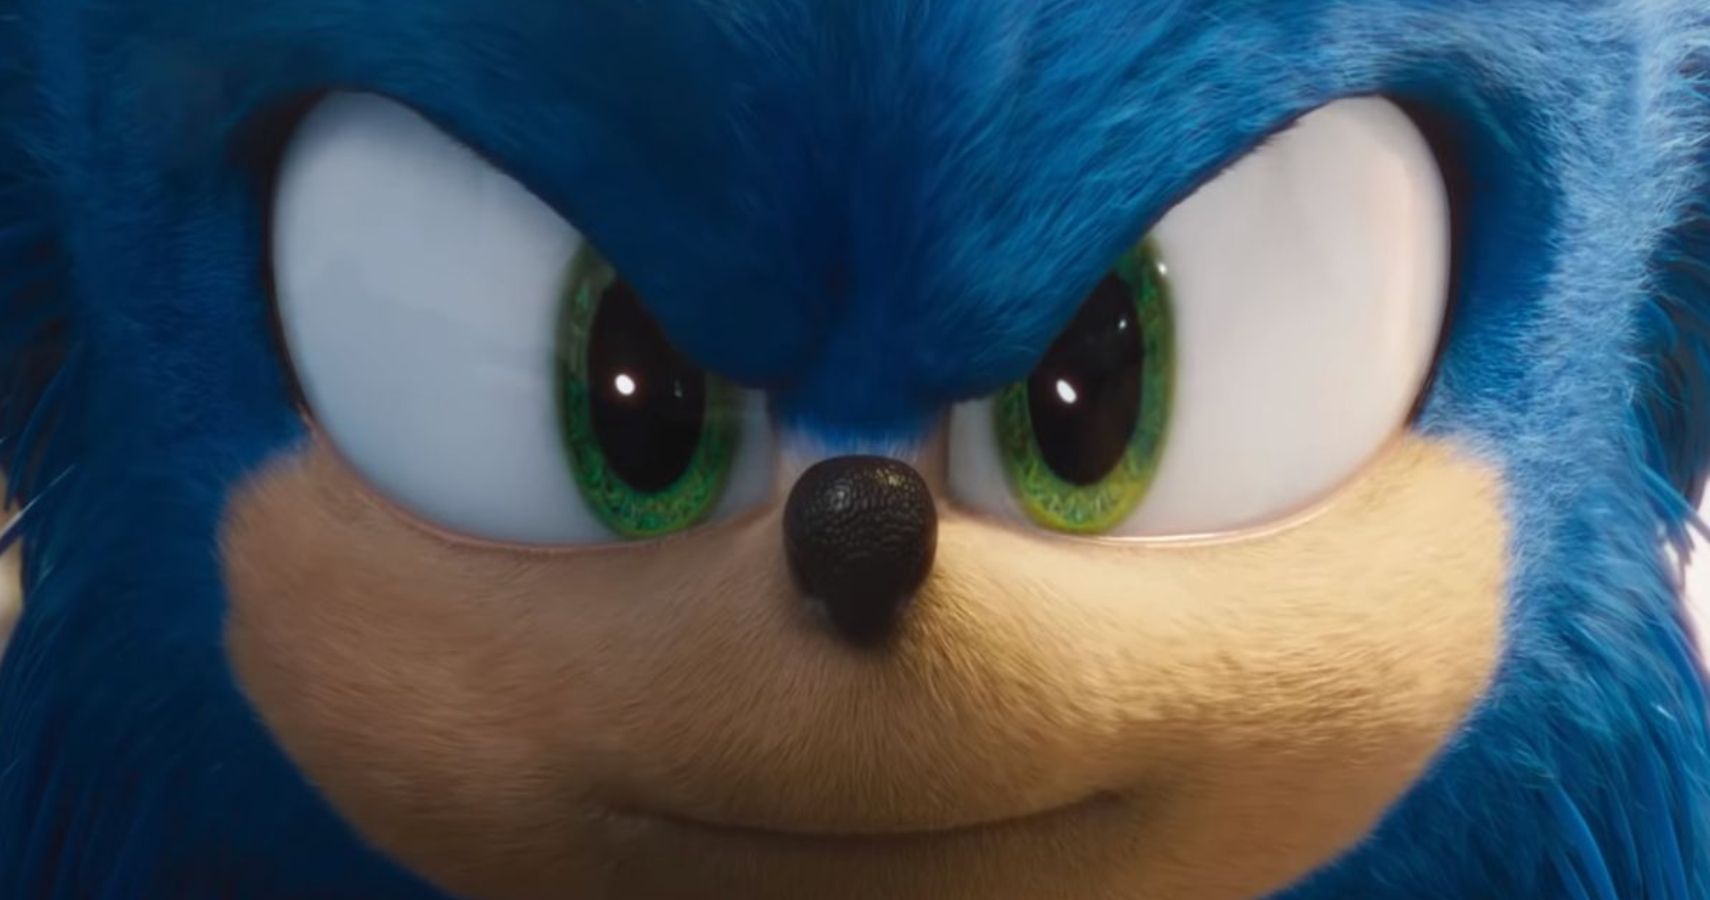 Sonic the Hedgehog 2 movie plot has been leaked online